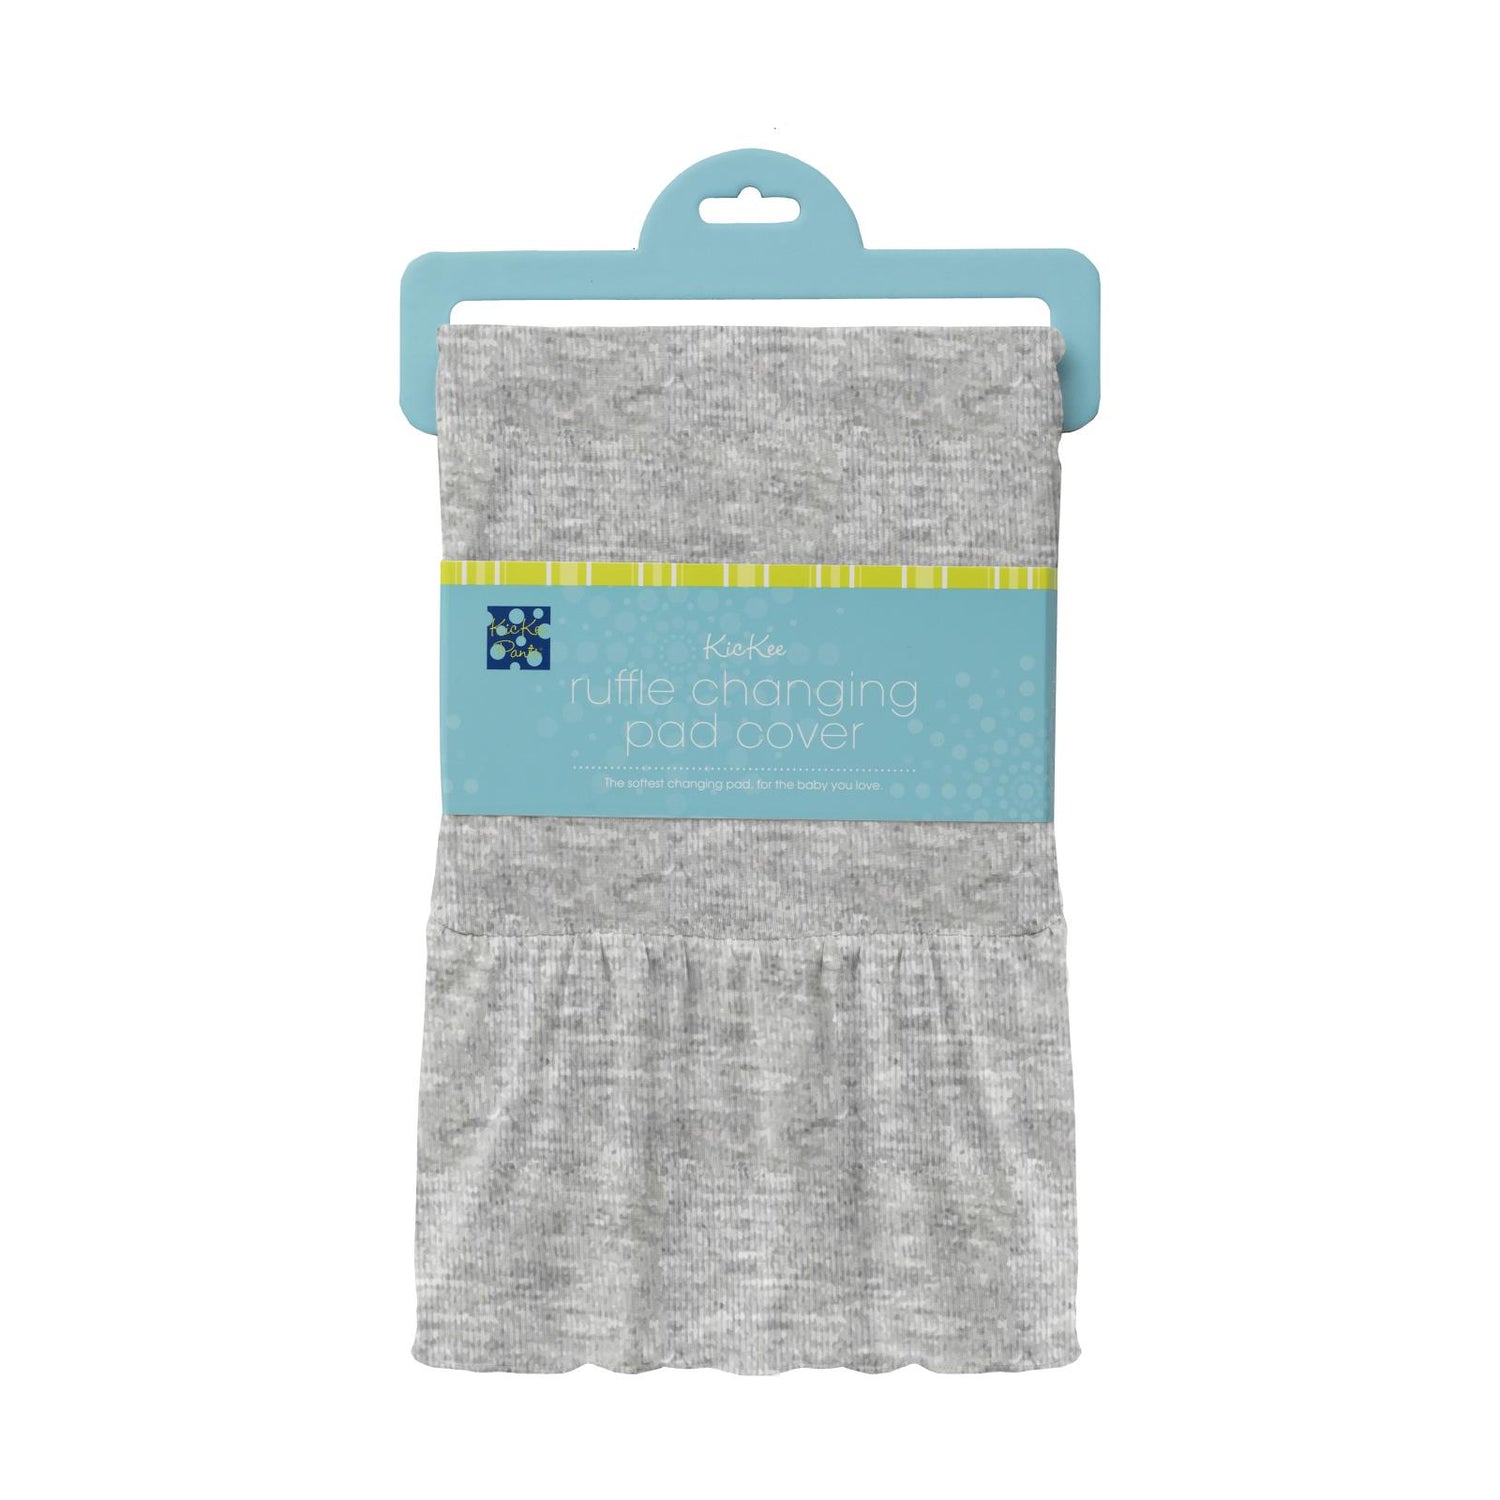 Ruffle Changing Pad Cover in Heathered Mist